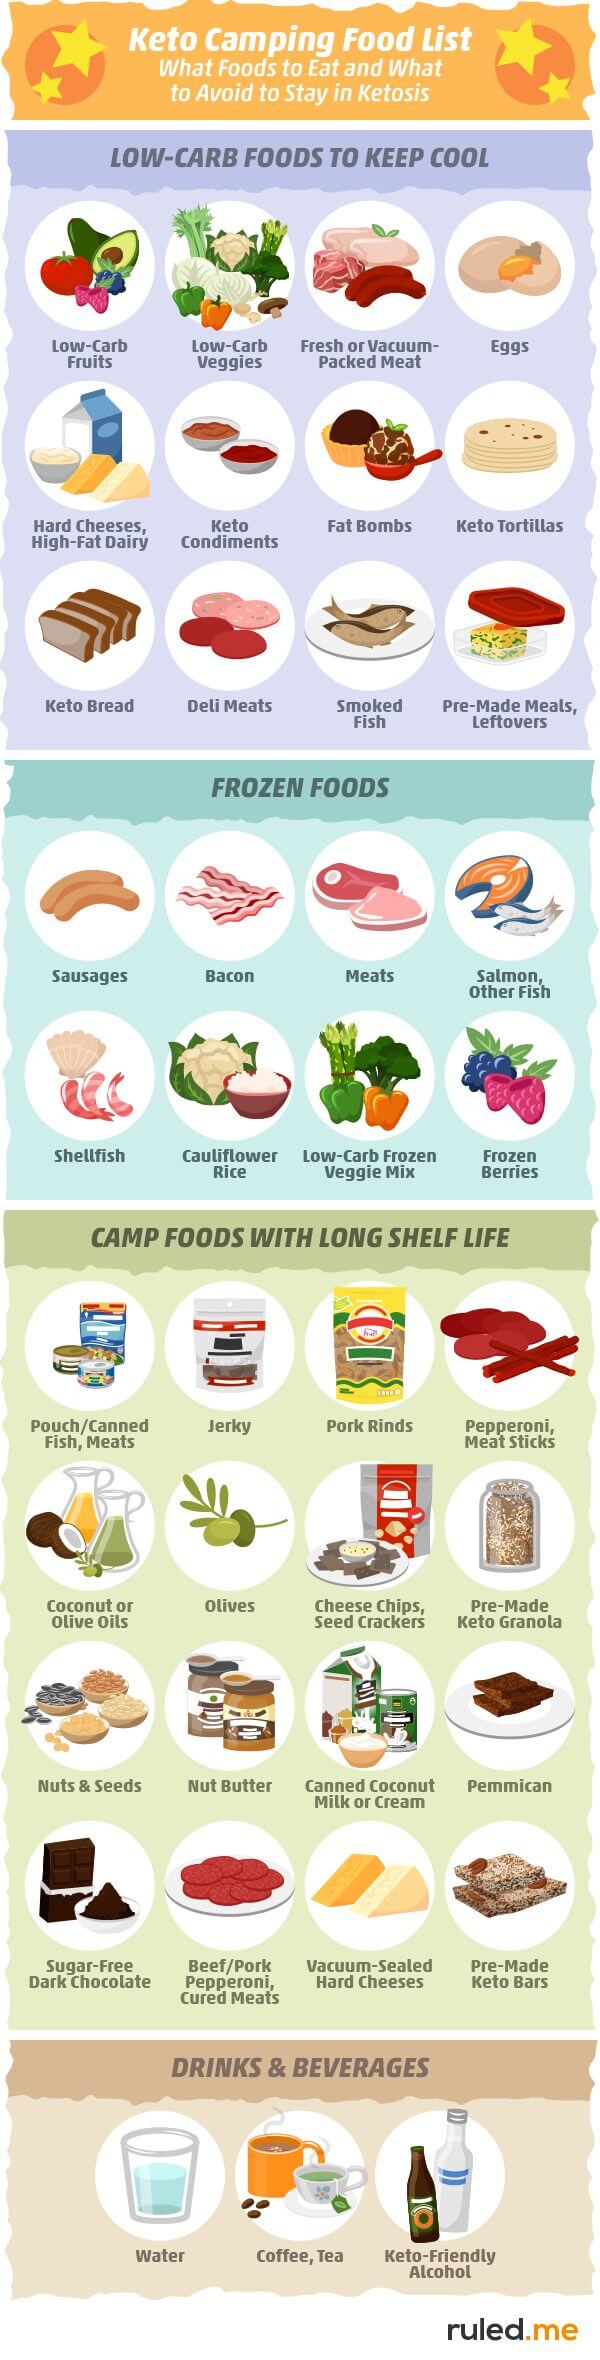 Keto Camping & Hiking Food Guide [Planning, Recipes, & Tips]